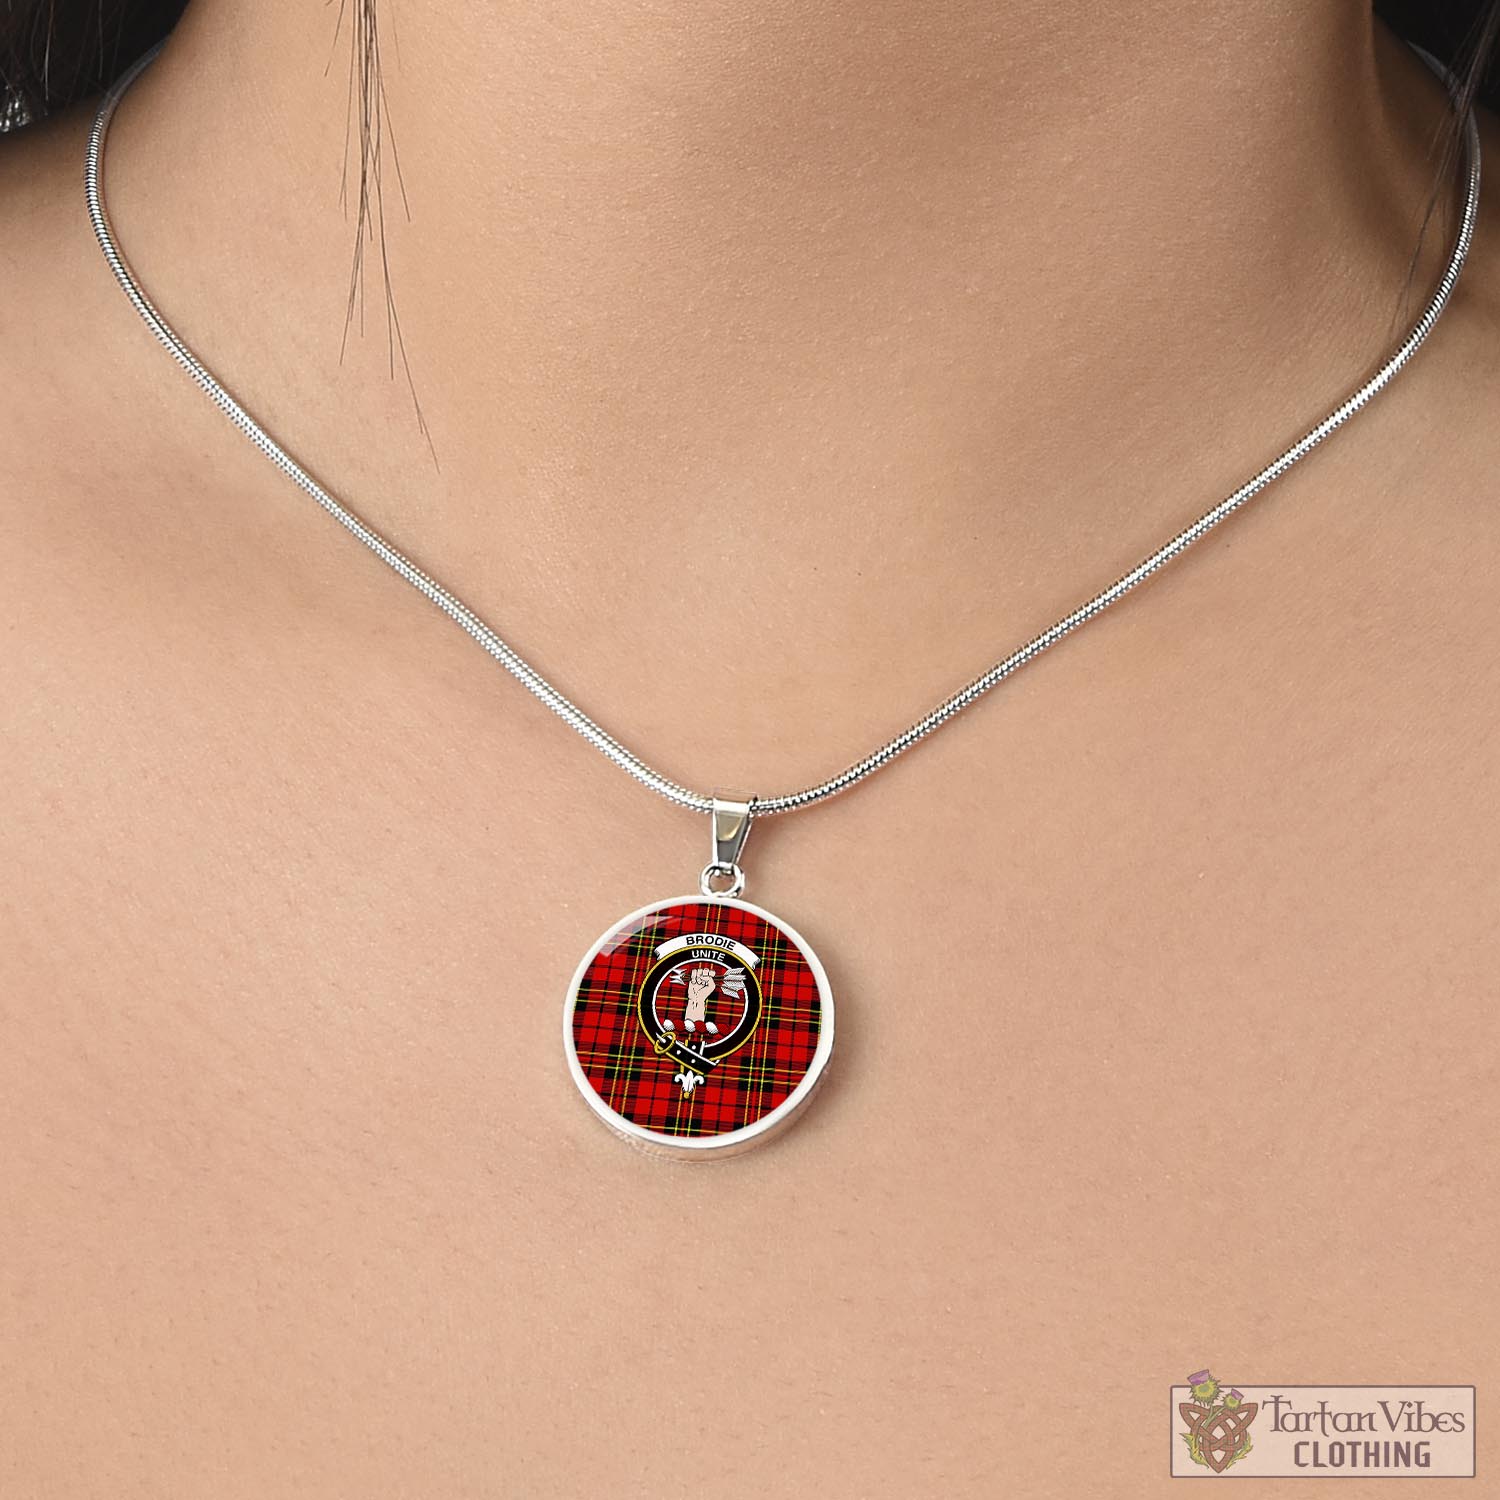 Tartan Vibes Clothing Brodie Modern Tartan Circle Necklace with Family Crest